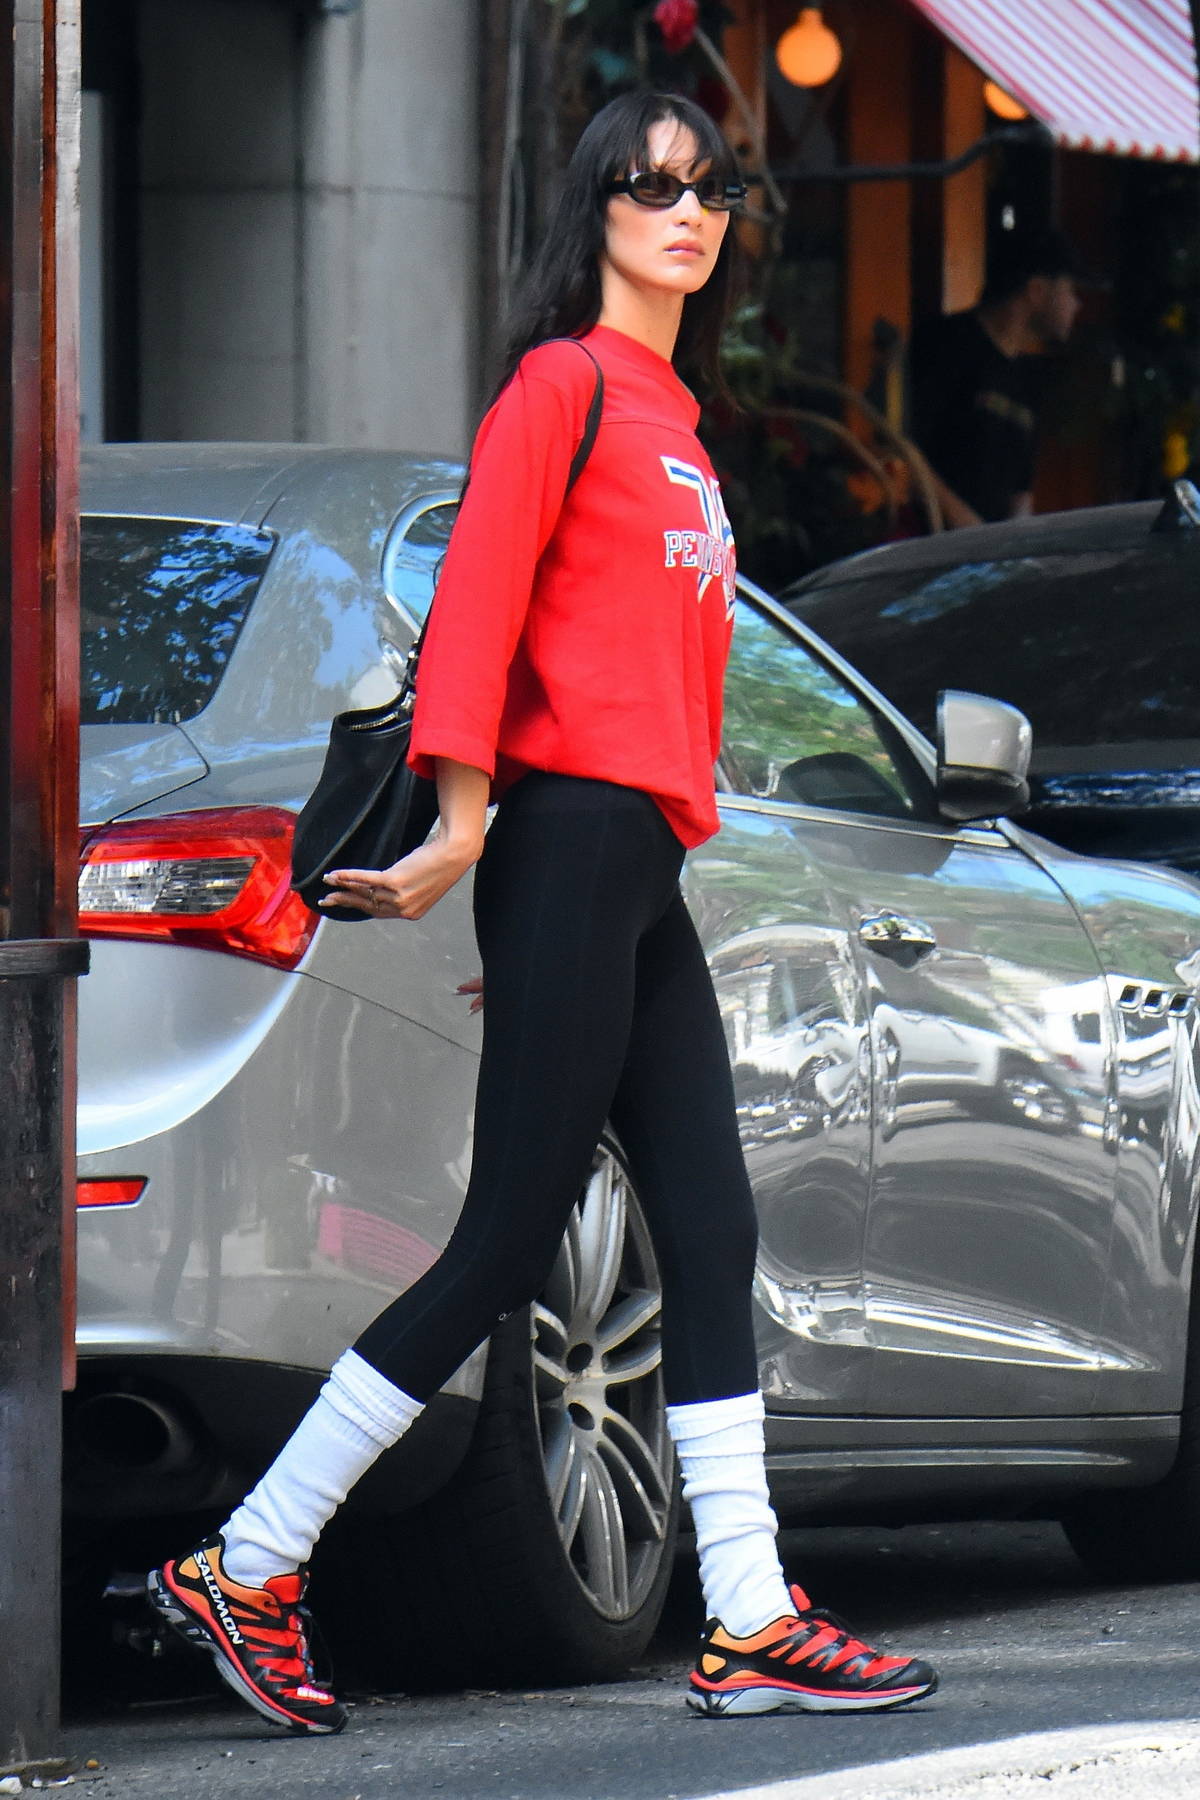 bella hadid wears a bright red sweater and black leggings while out on an afternoon stroll through manhattan in new york city 050822 2